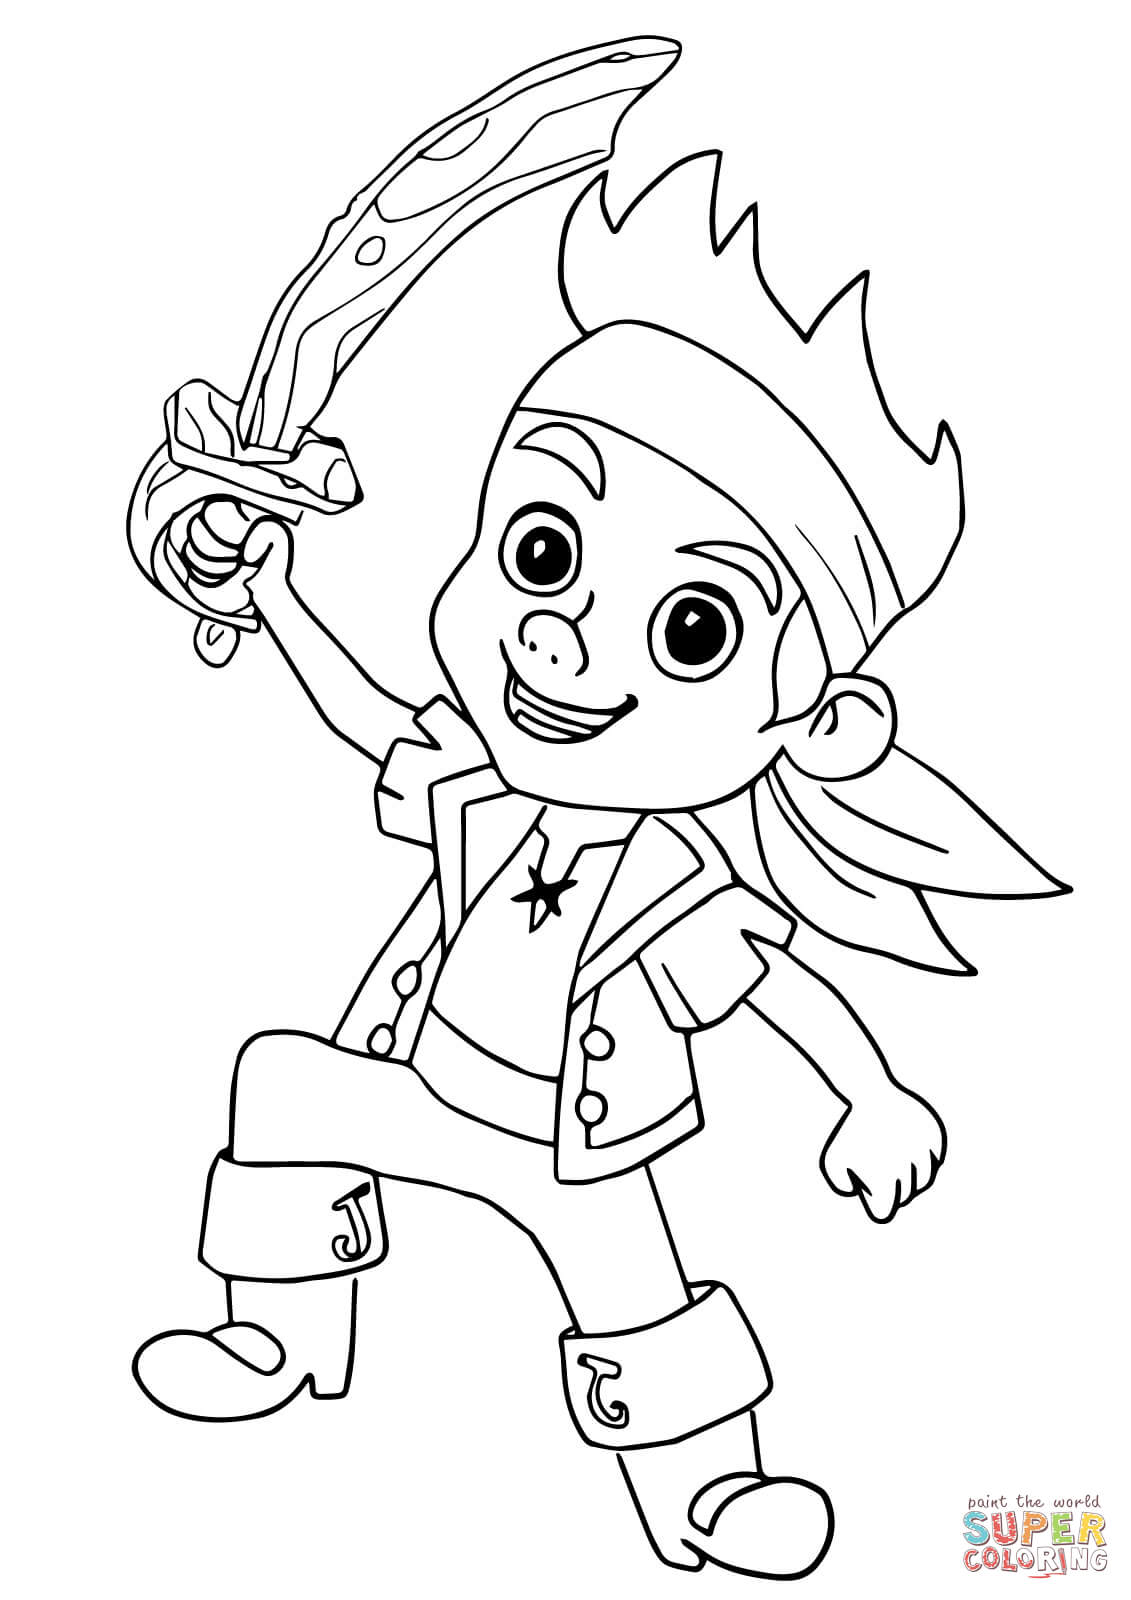 Jake Pirate coloring page | Free Printable Coloring Pages